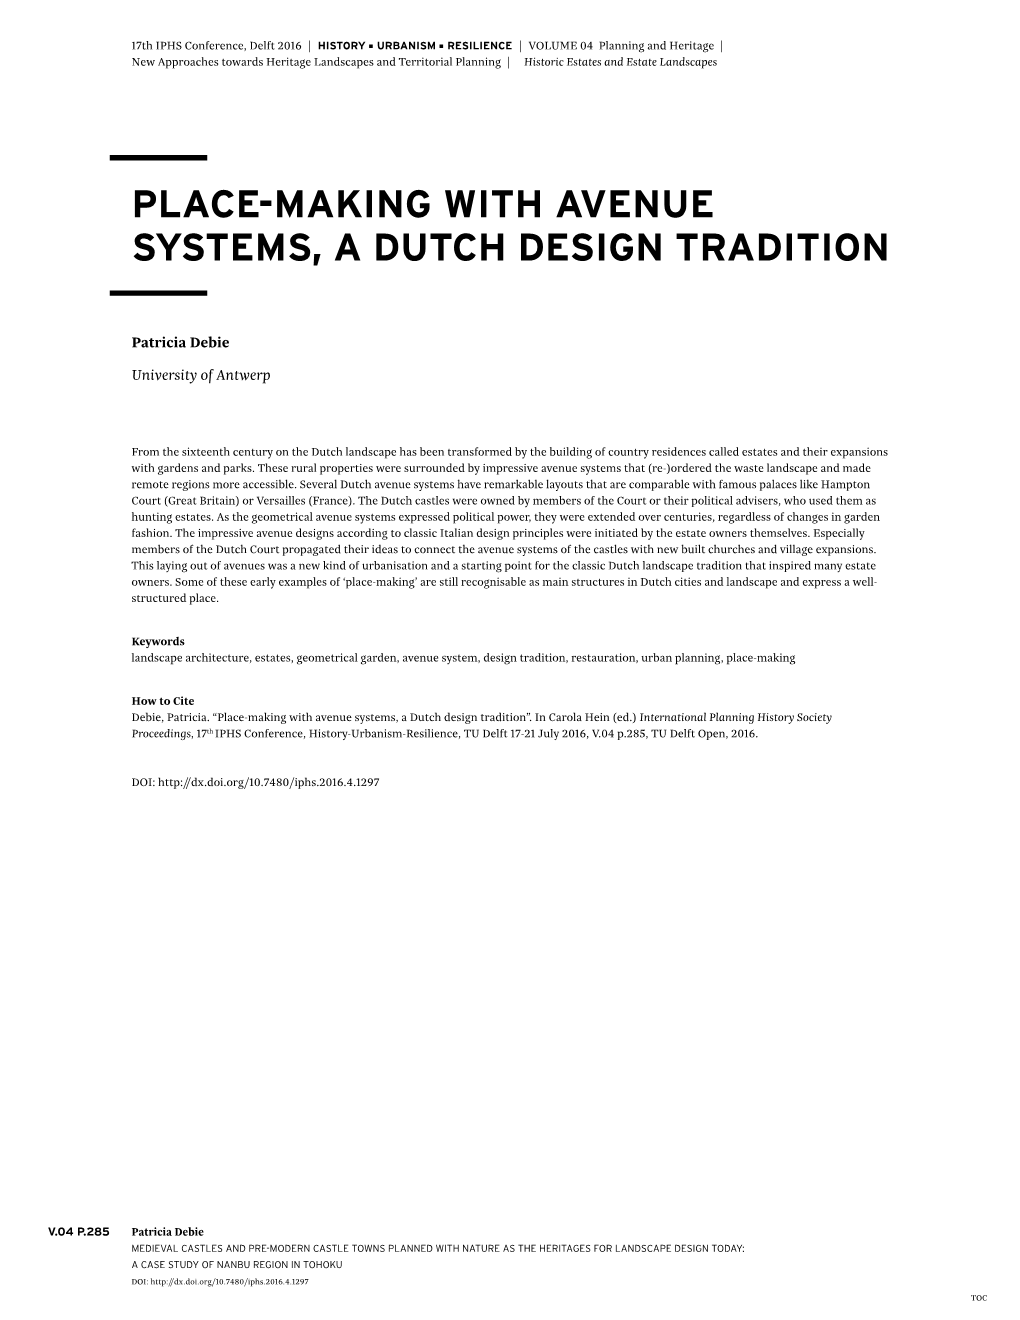 Place-Making with Avenue Systems, a Dutch Design Tradition